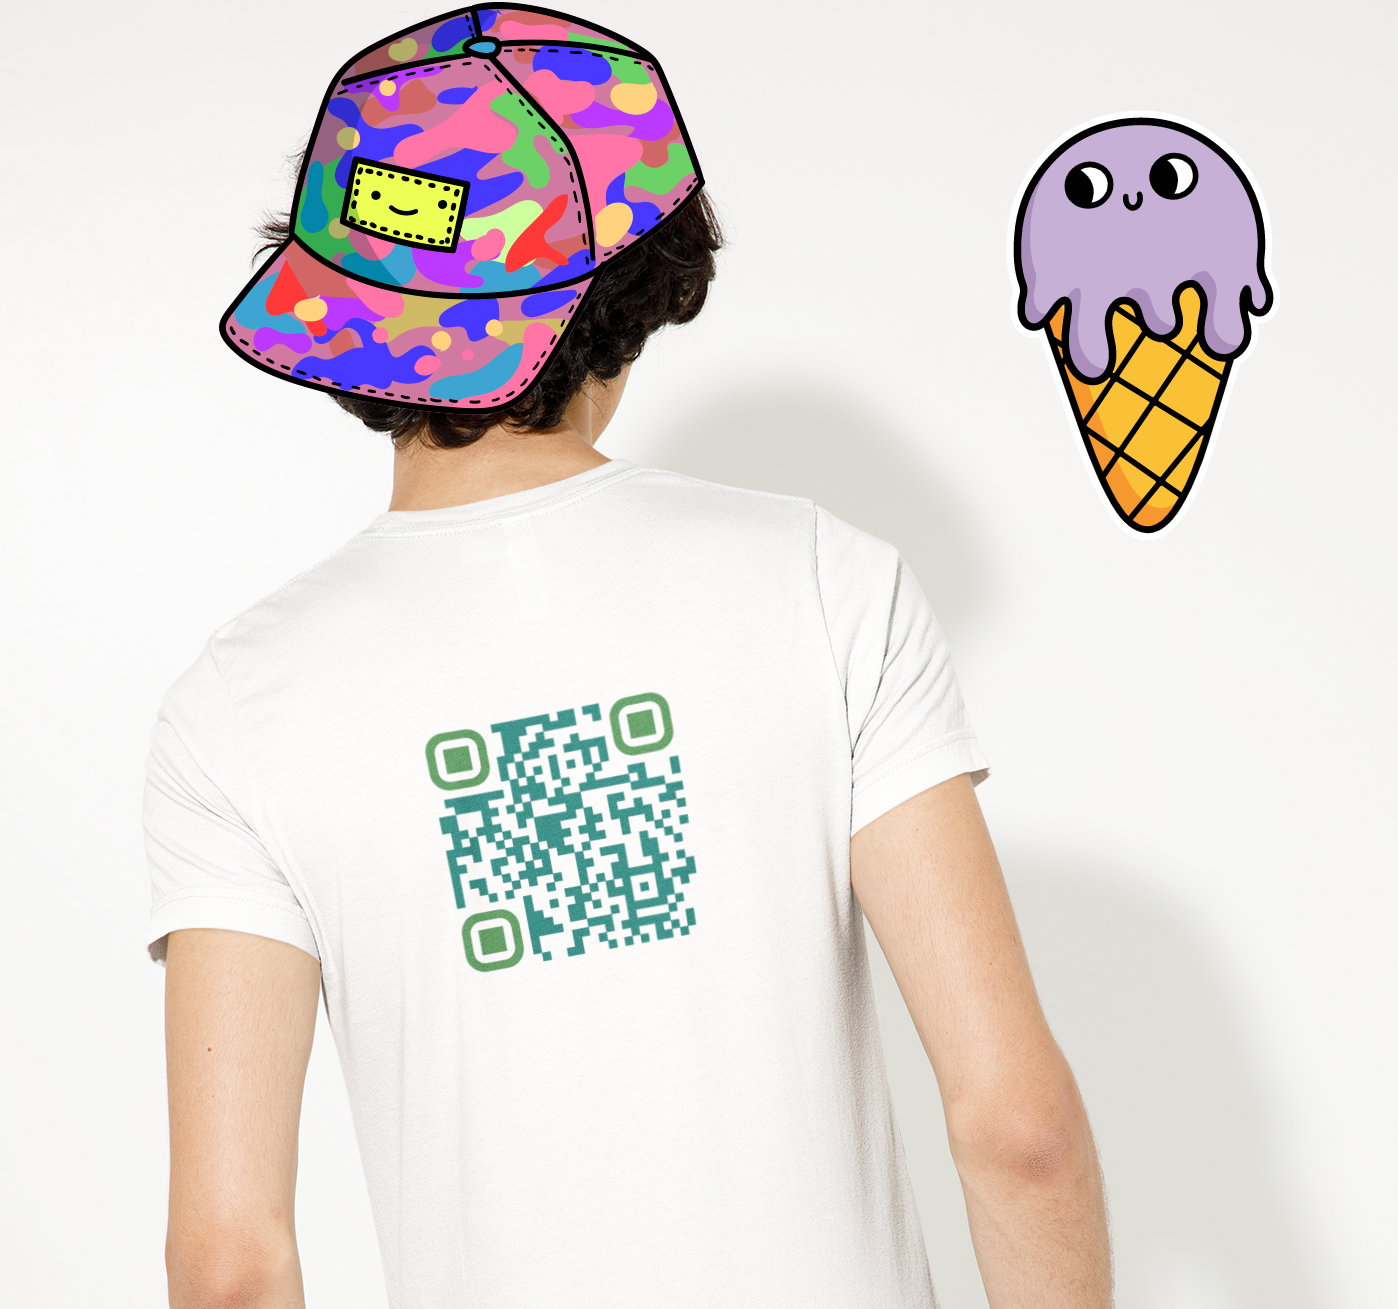 QR Code for 'brighten someone's day today' on the back of a white t-shirt